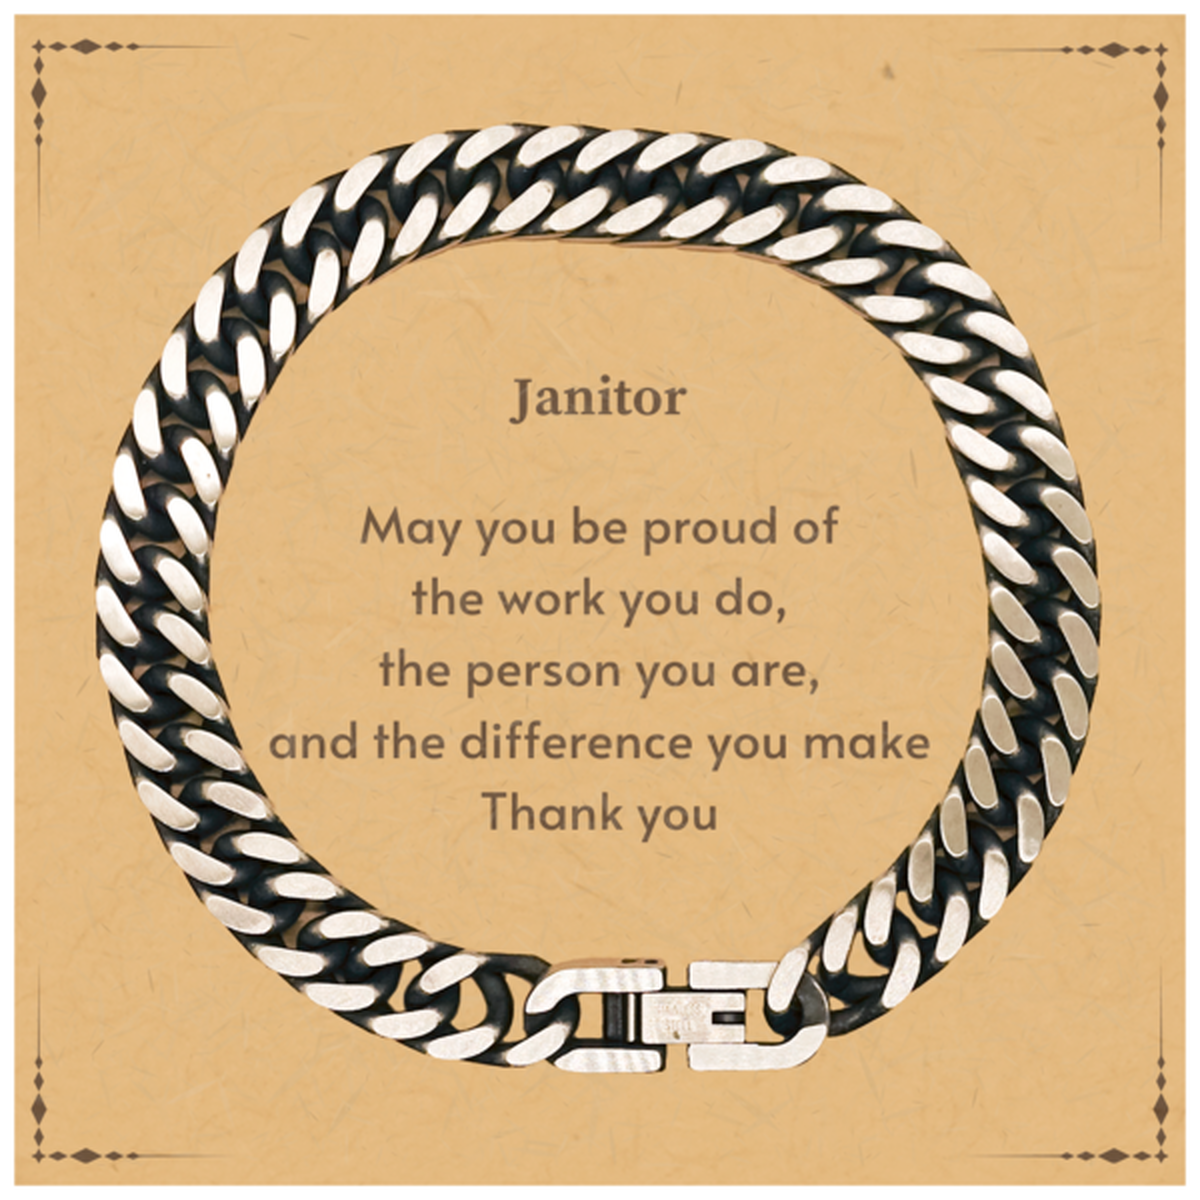 Heartwarming Cuban Link Chain Bracelet Retirement Coworkers Gifts for Janitor, Janitor May You be proud of the work you do, the person you are Gifts for Boss Men Women Friends